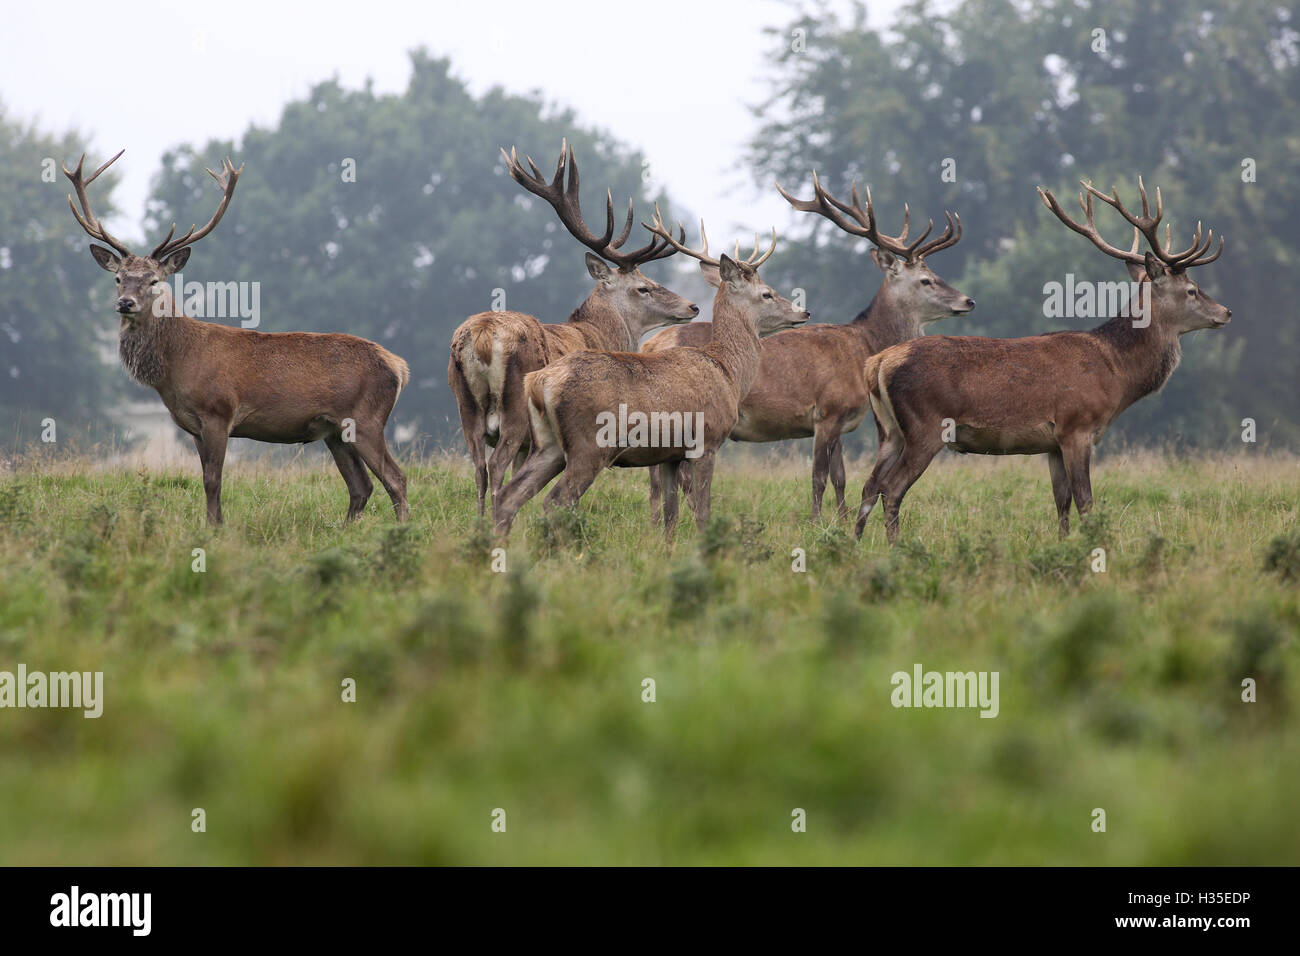 Red deer stags in the early morning fog of a hot autumn day at Studley Royal deer park at Fountains Abbey near Ripon, Yorkshire. Stock Photo